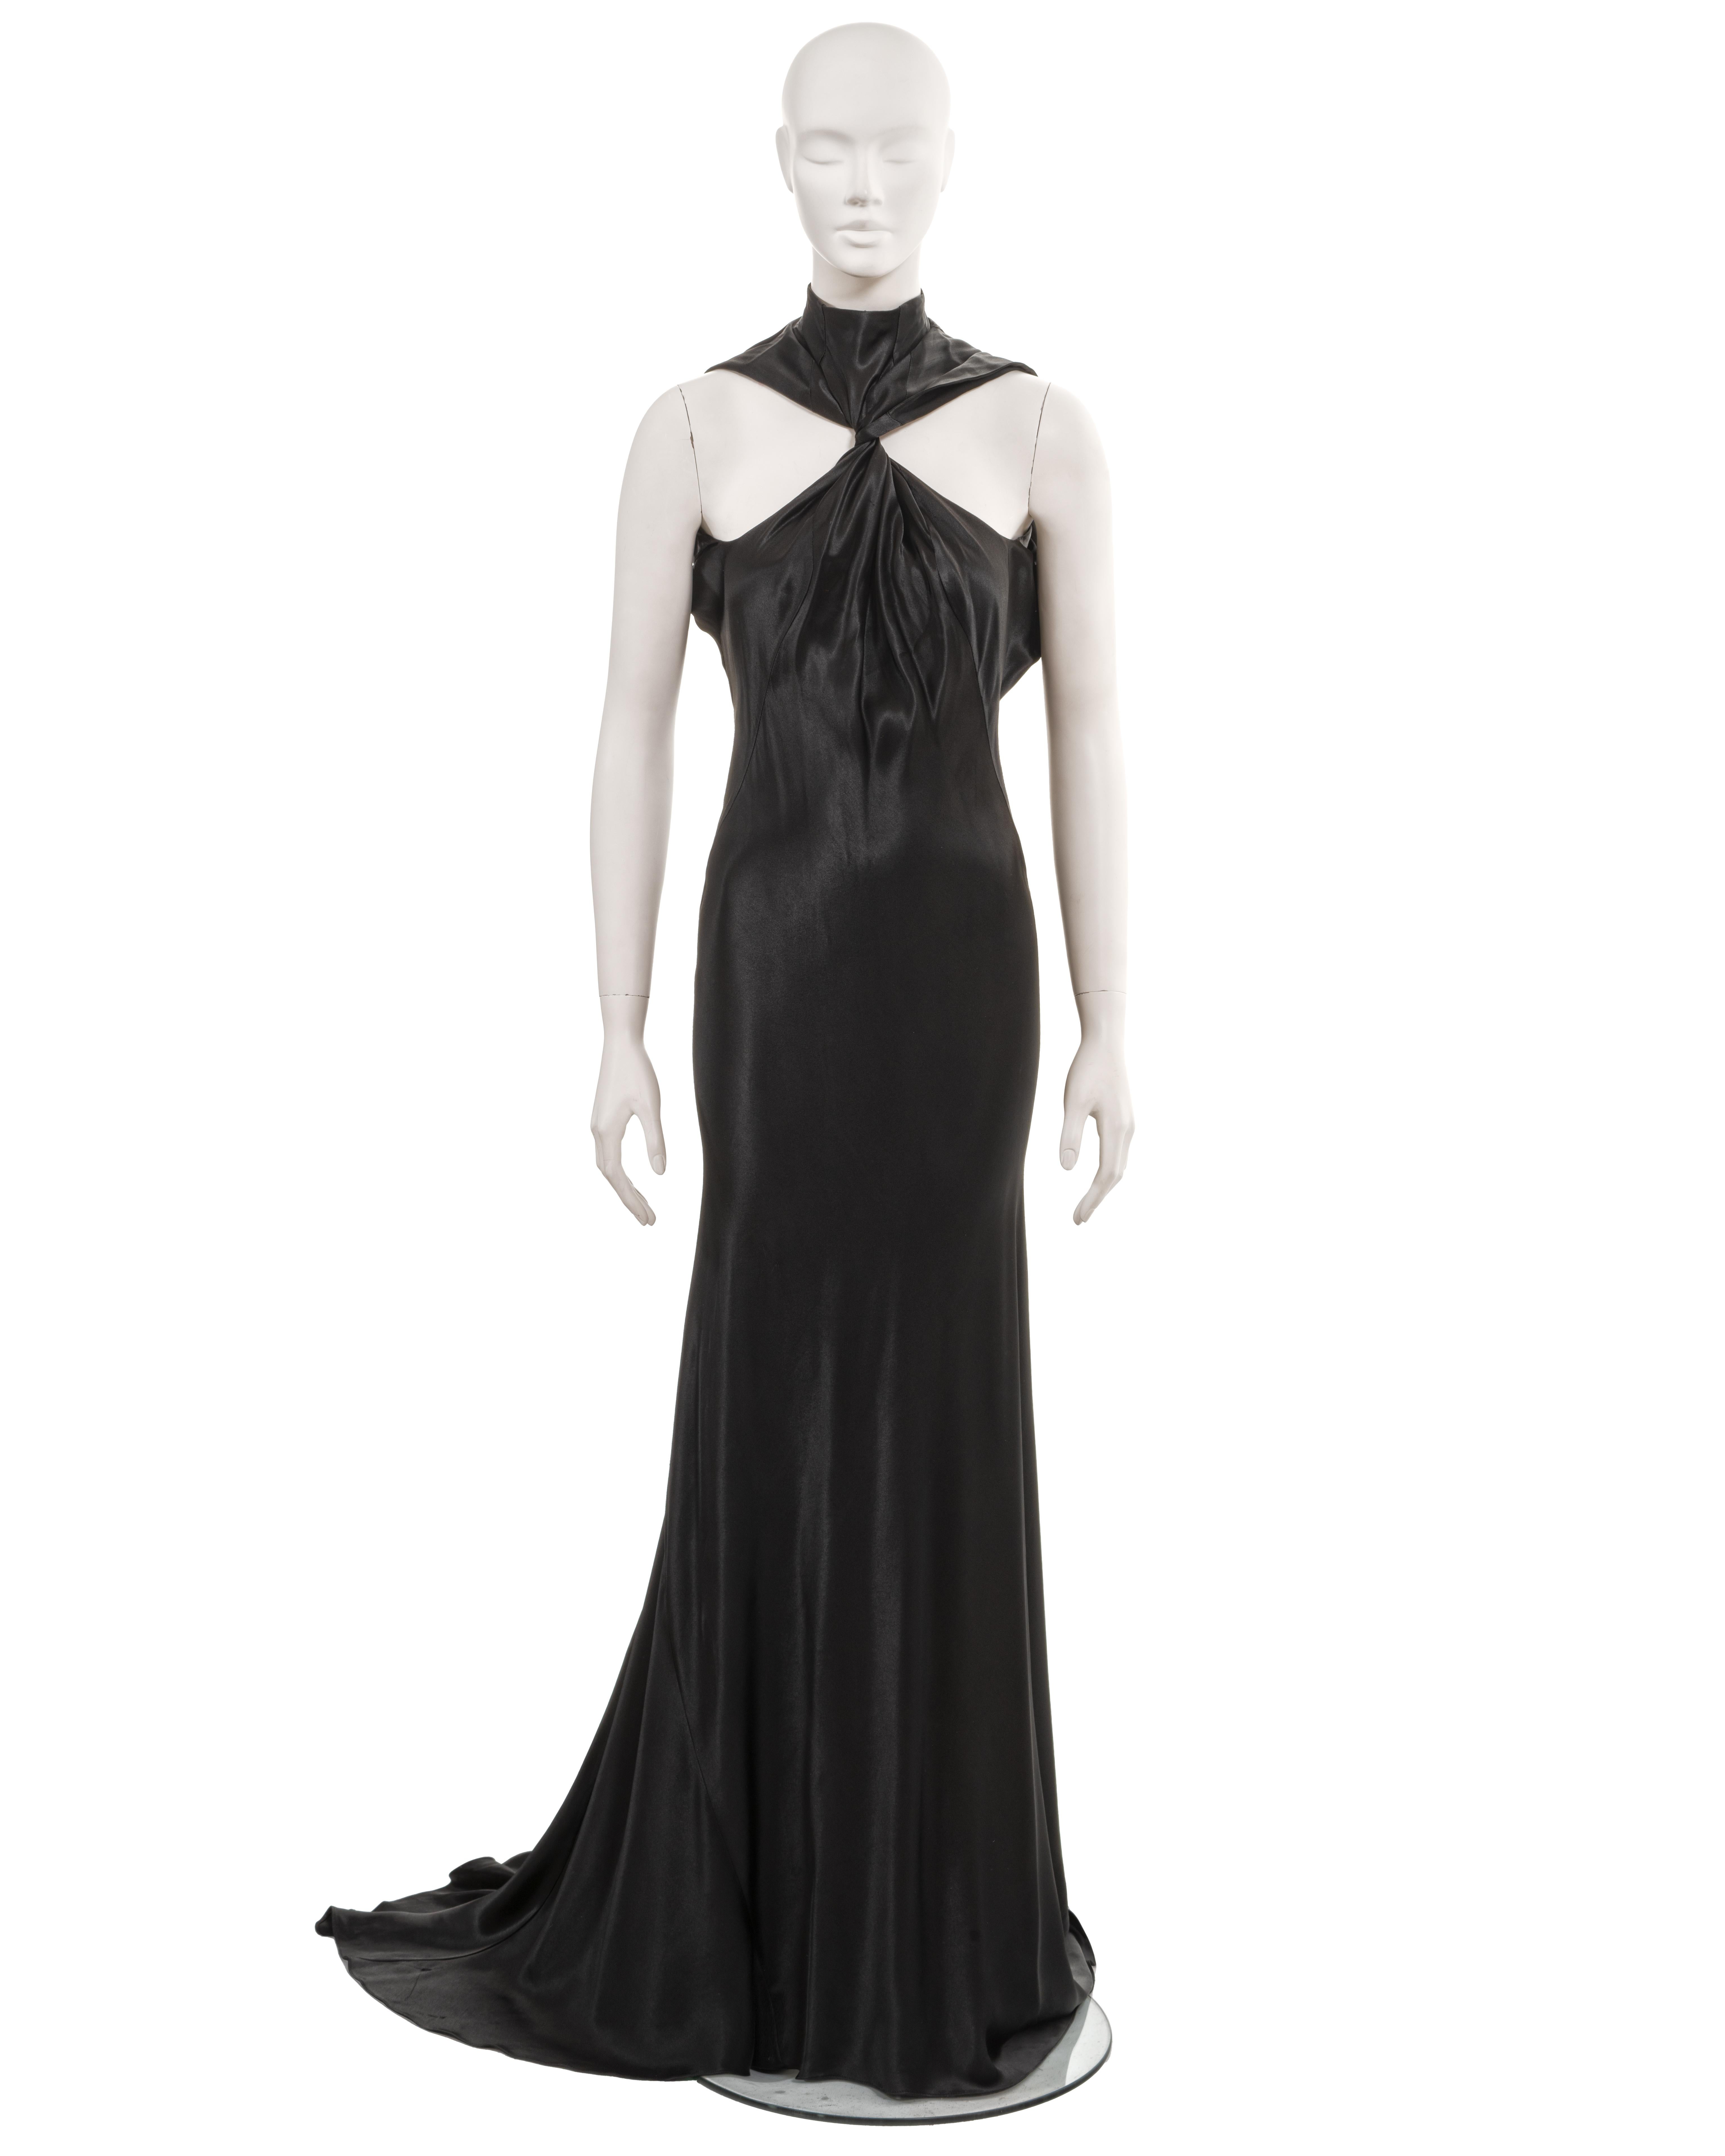 ▪ Plein Sud halterneck evening dress
▪ c. 1990
▪ Sold by One of a Kind Archive
▪ Black bias-cut satin 
▪ High neck with singular button fastening at the rear
▪ Twisted neckline and shoulder straps 
▪ Floor-length skirt with dramatic train 
▪ Size